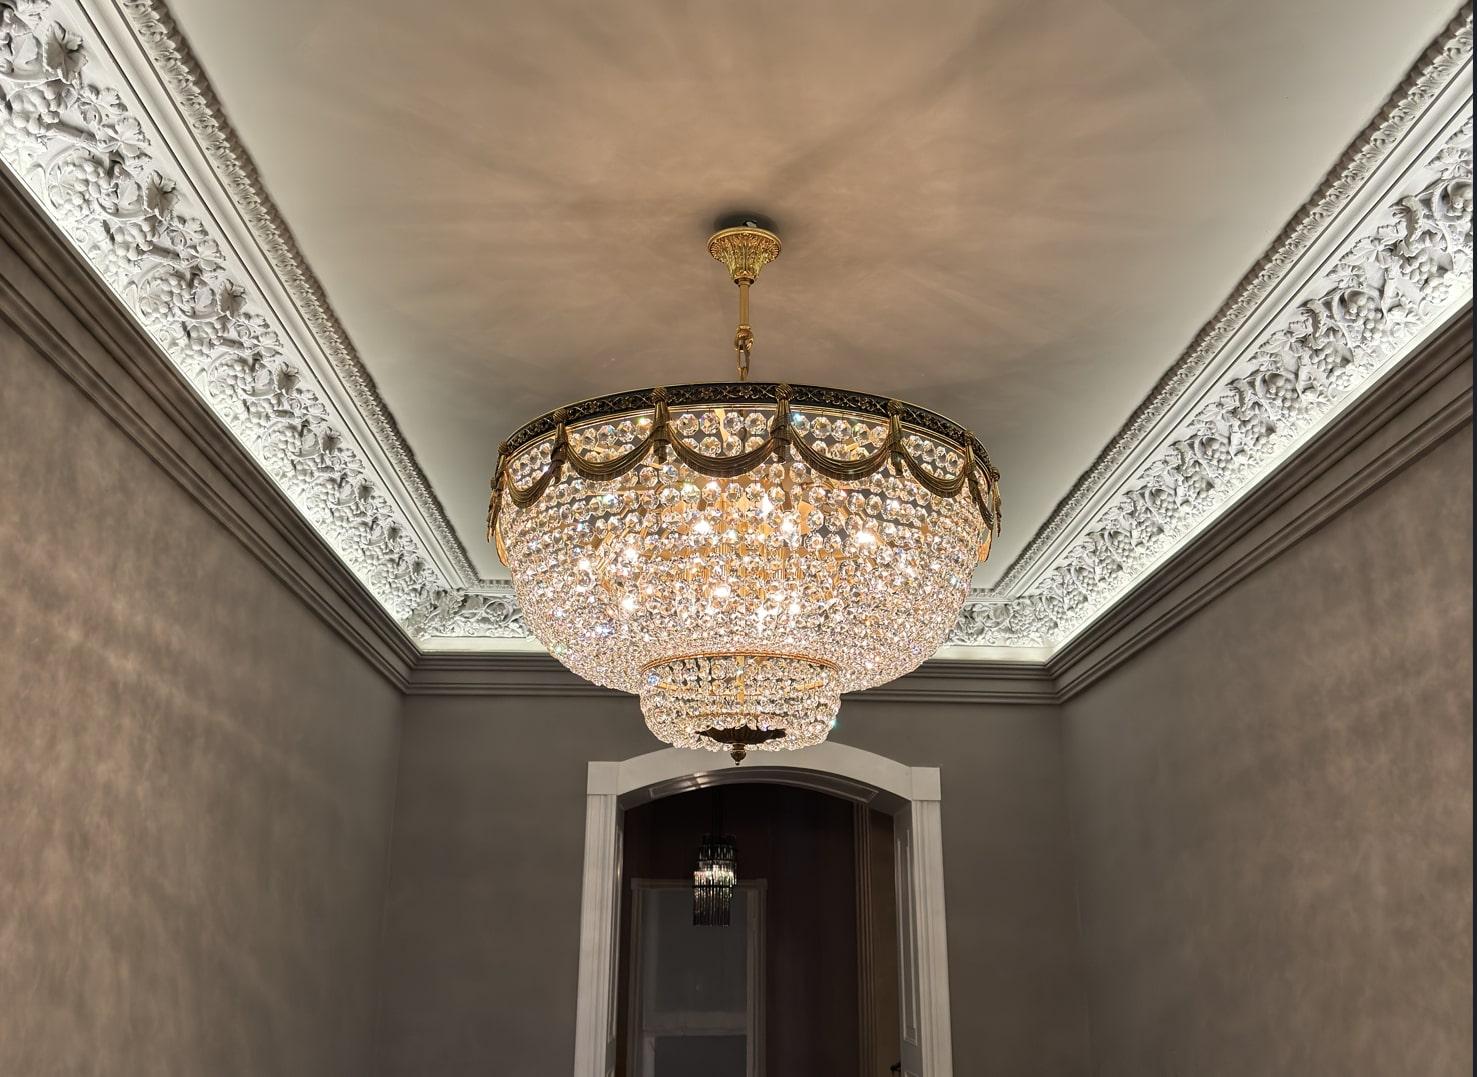 The brass Plafonnier chandelier is a testament to opulence and craftsmanship. We manufacture in-house and offer the flexibility of both smaller and larger sizes to ensure the perfect fit for your space.

Key Features:
- Dimensions: diameter 90 cm,